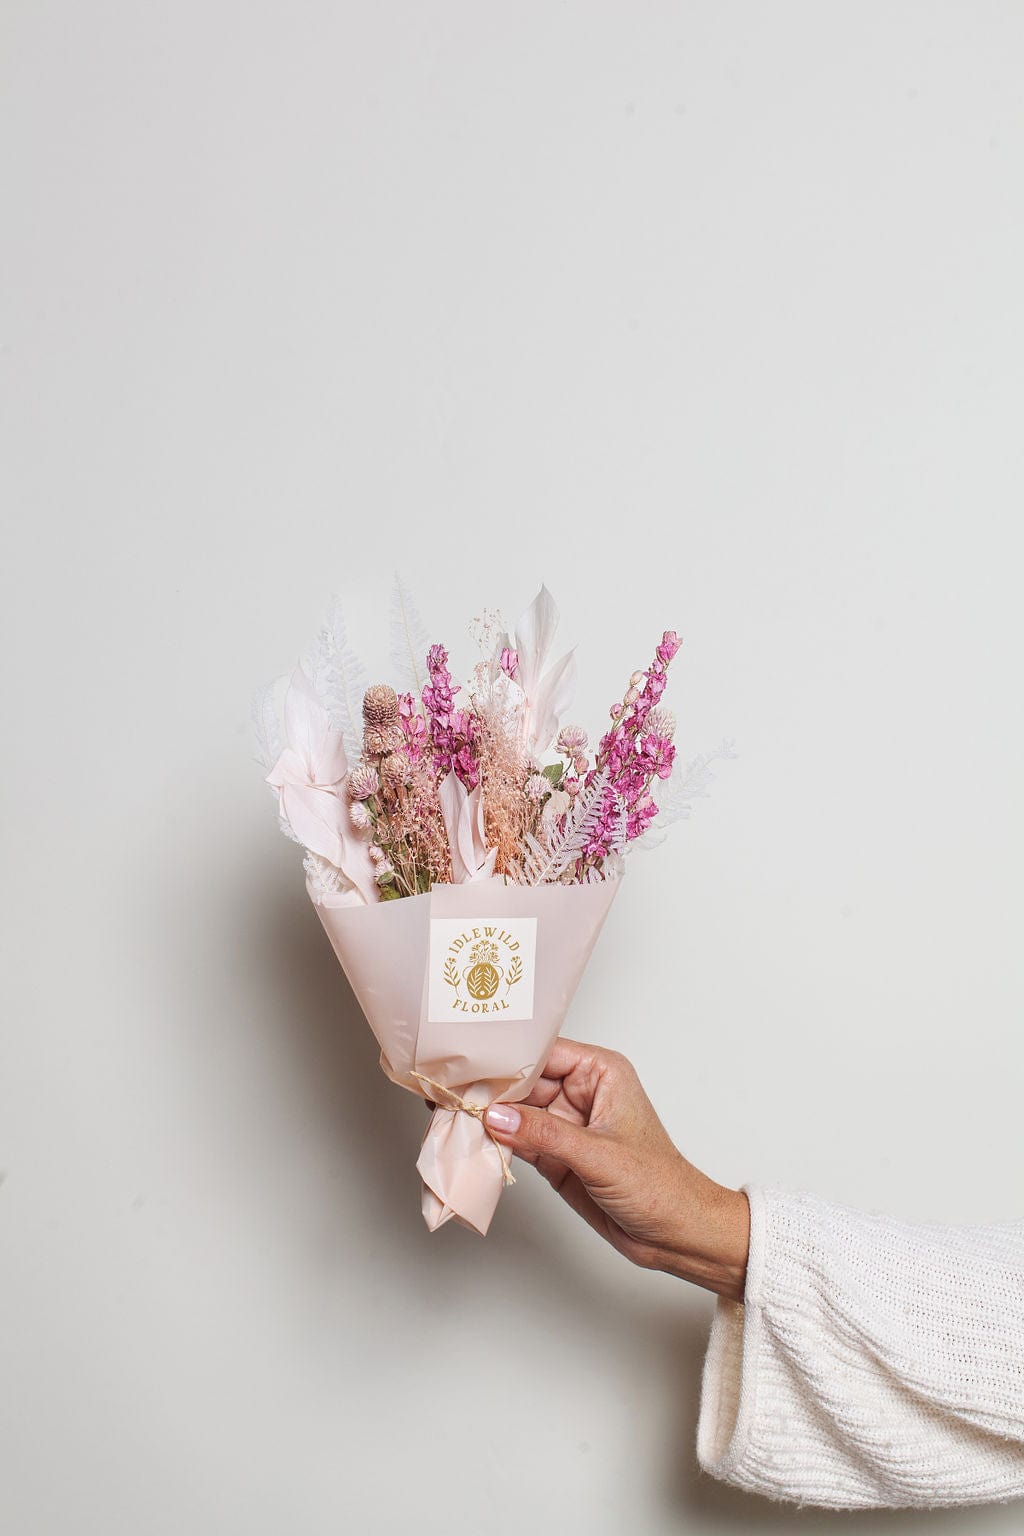 Idlewild Floral Co. Bouquets The Sweetheart Bouquet Petite